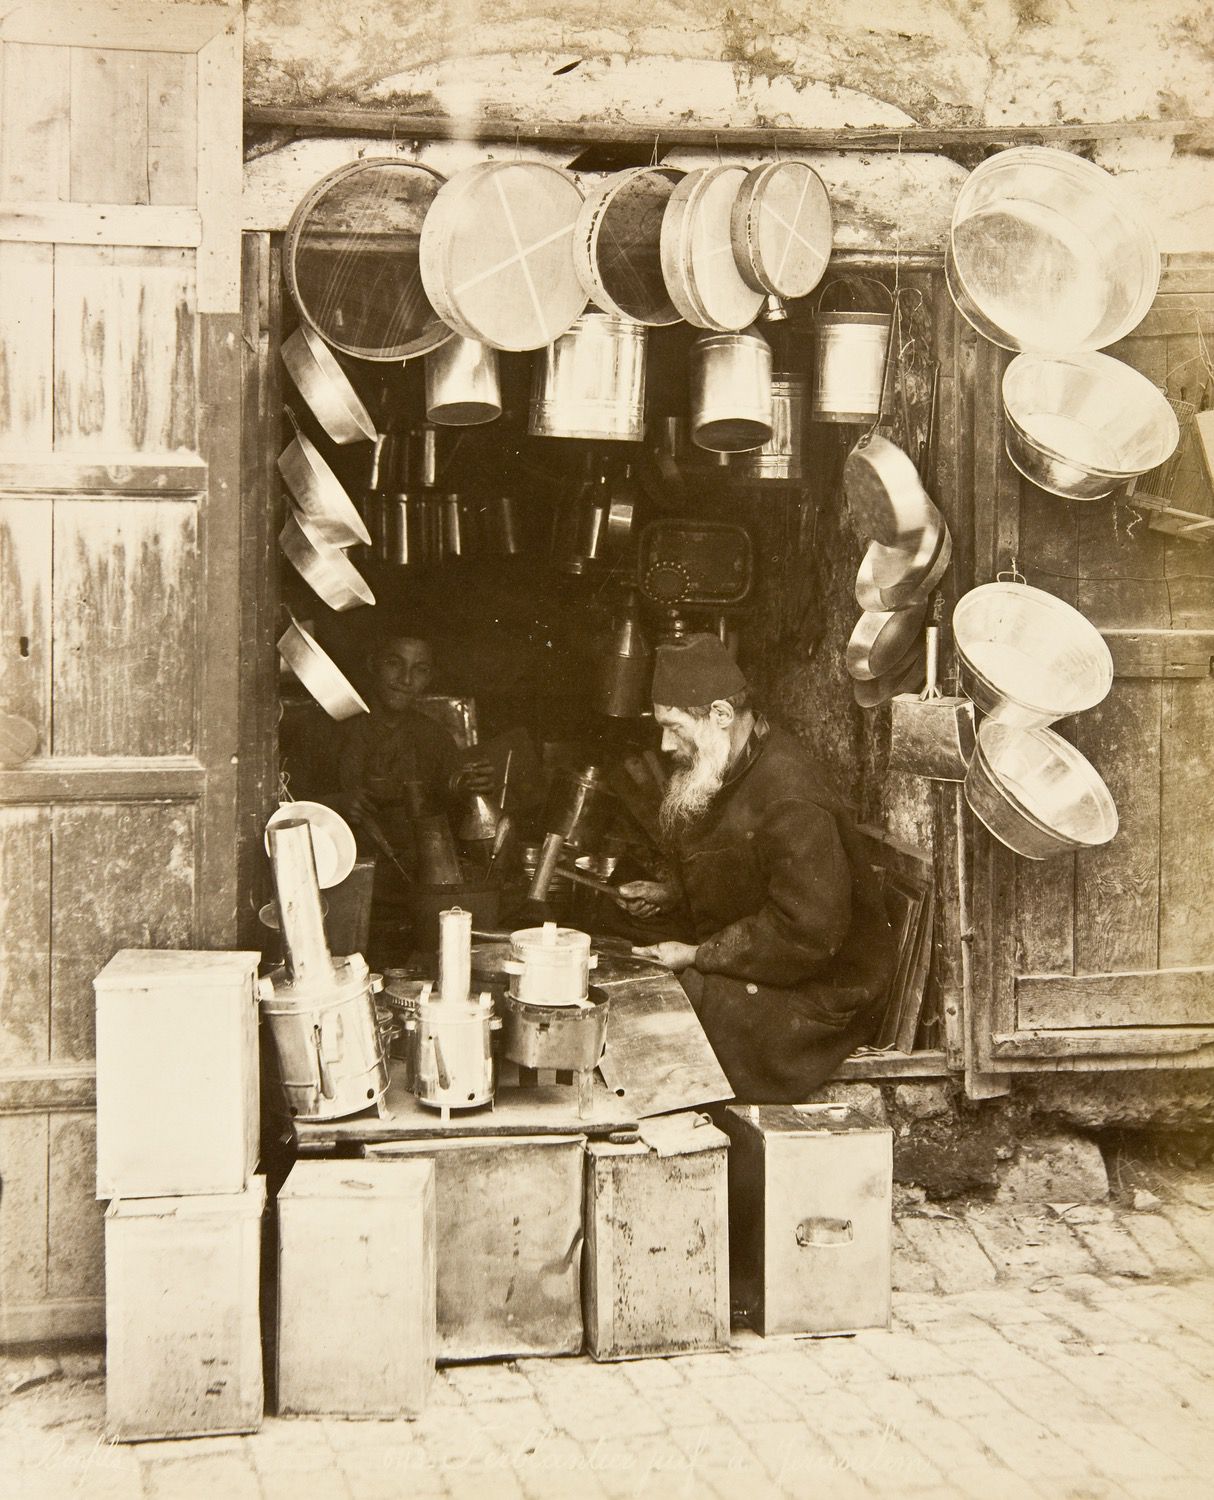 View of a tinsmith working in his shop